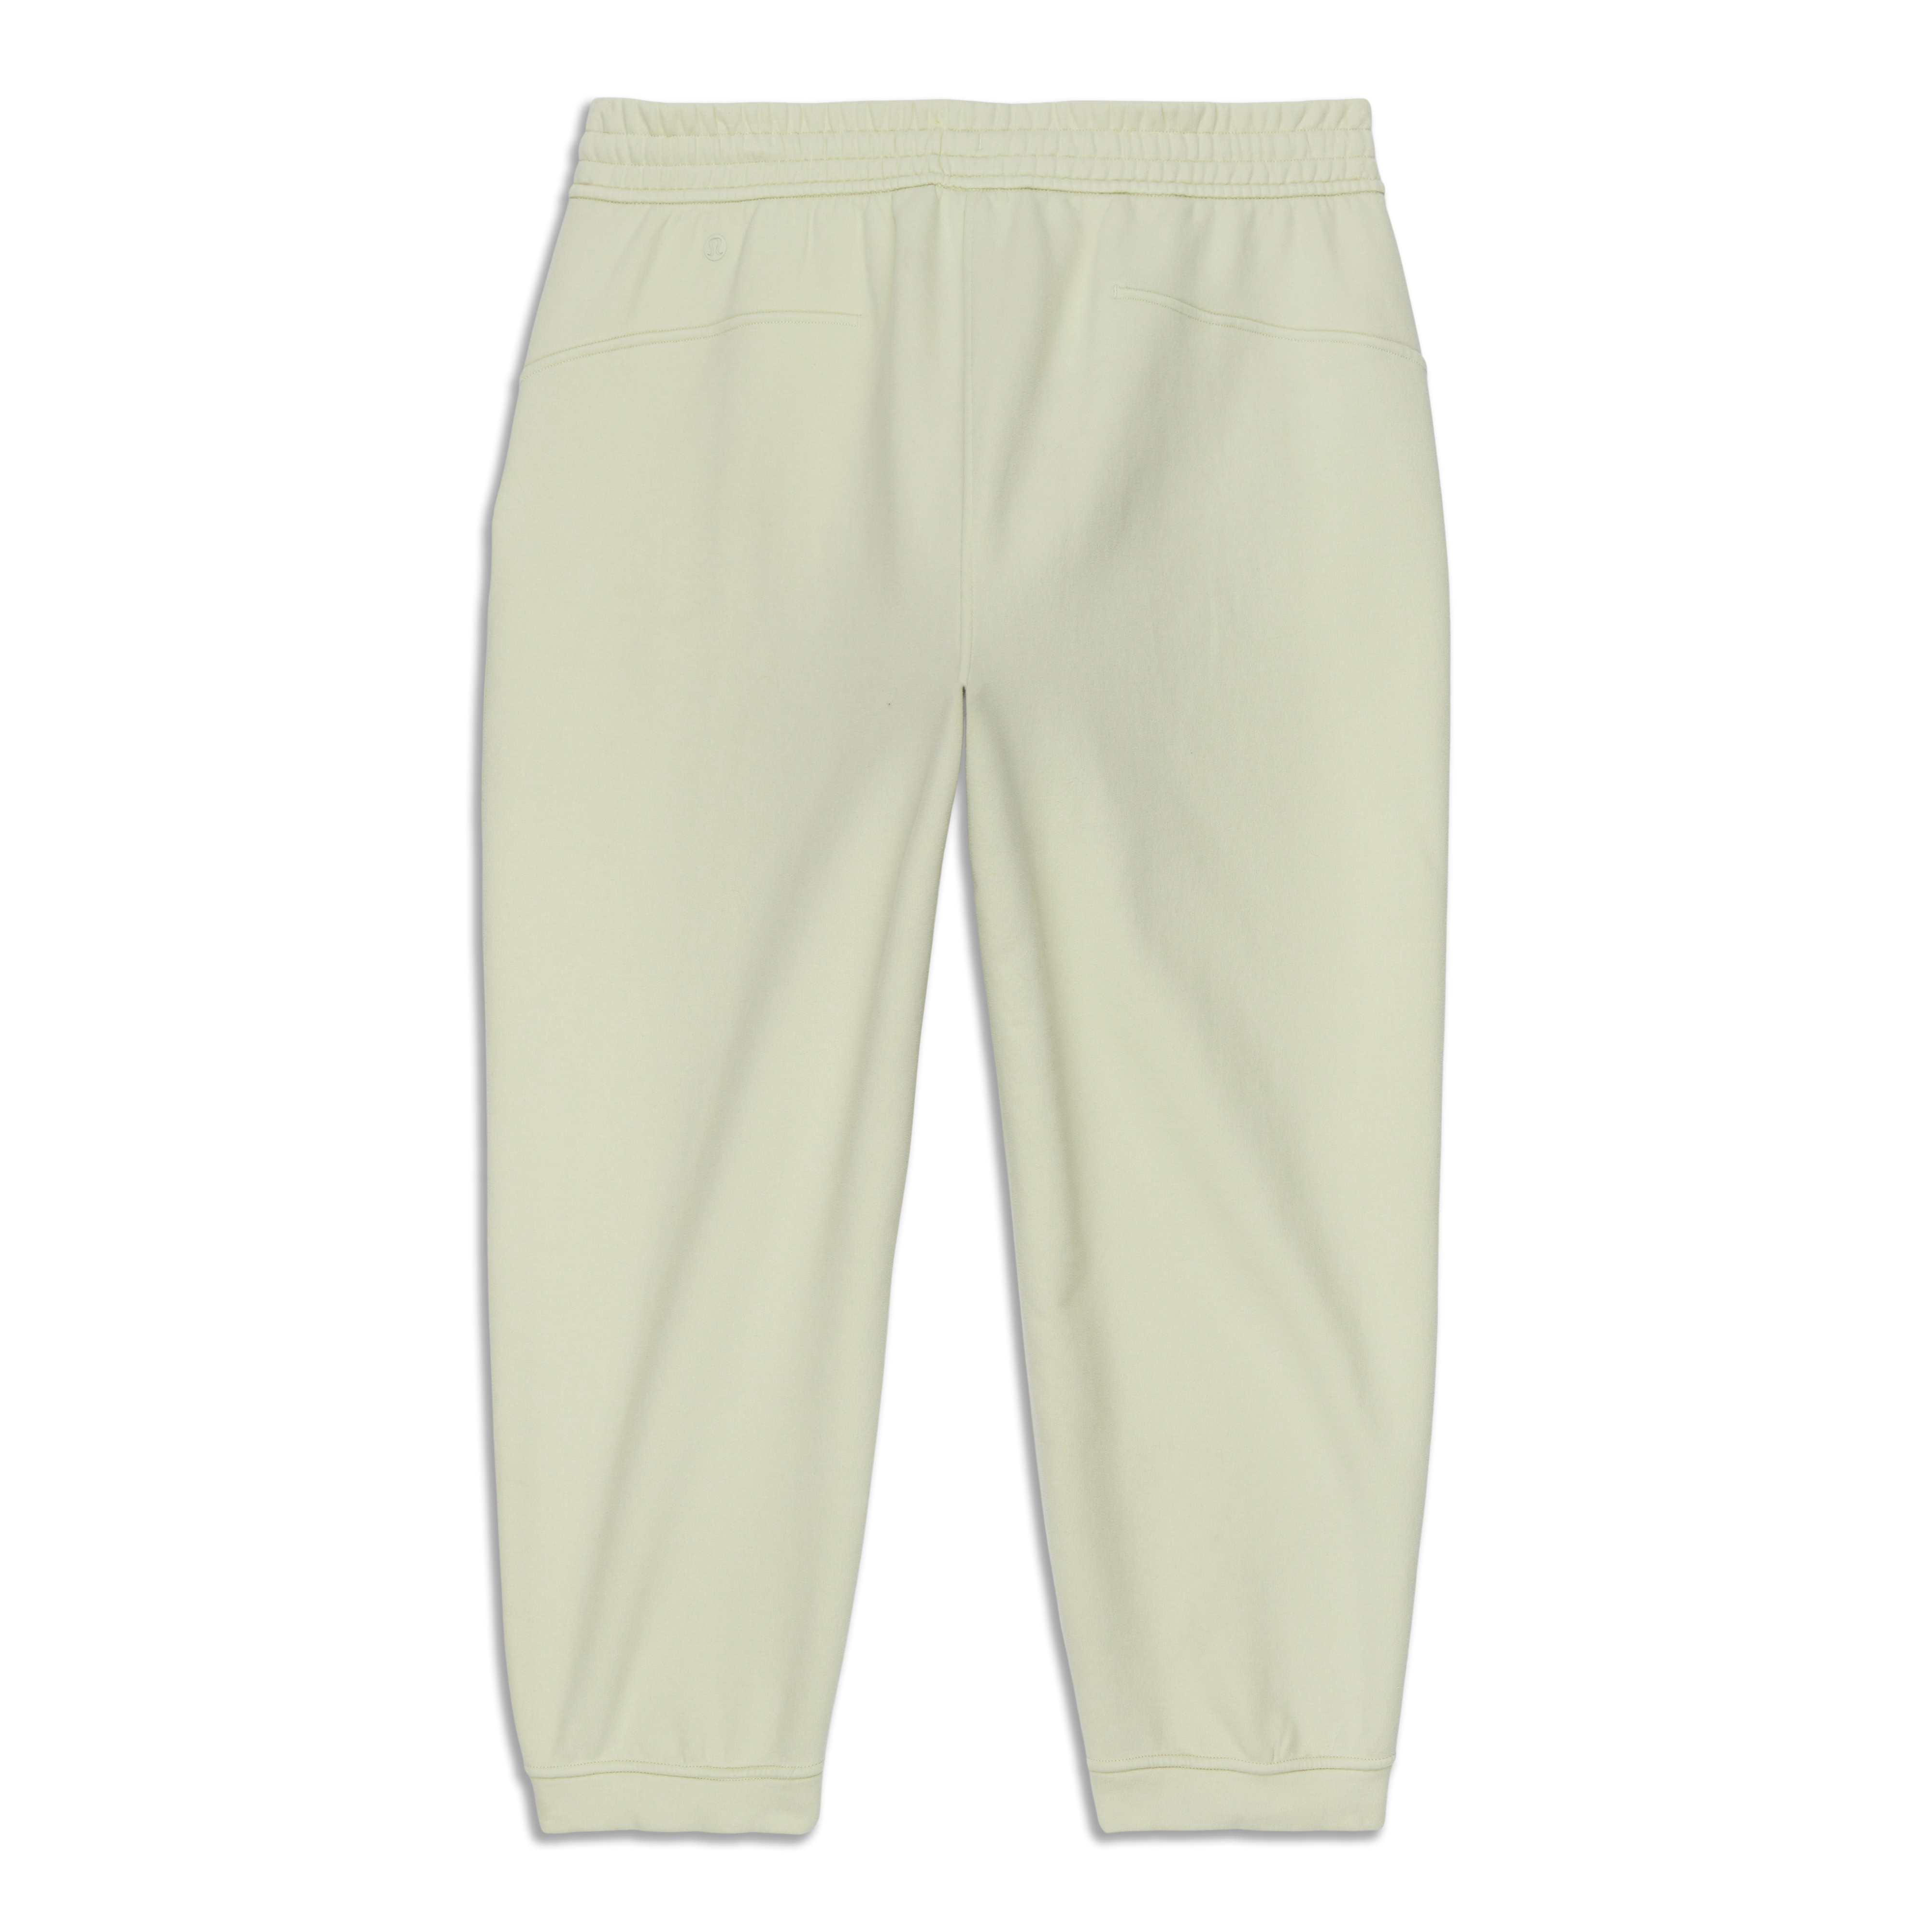 Moonbeam Country Store - Lole Women's Dionne Joggers